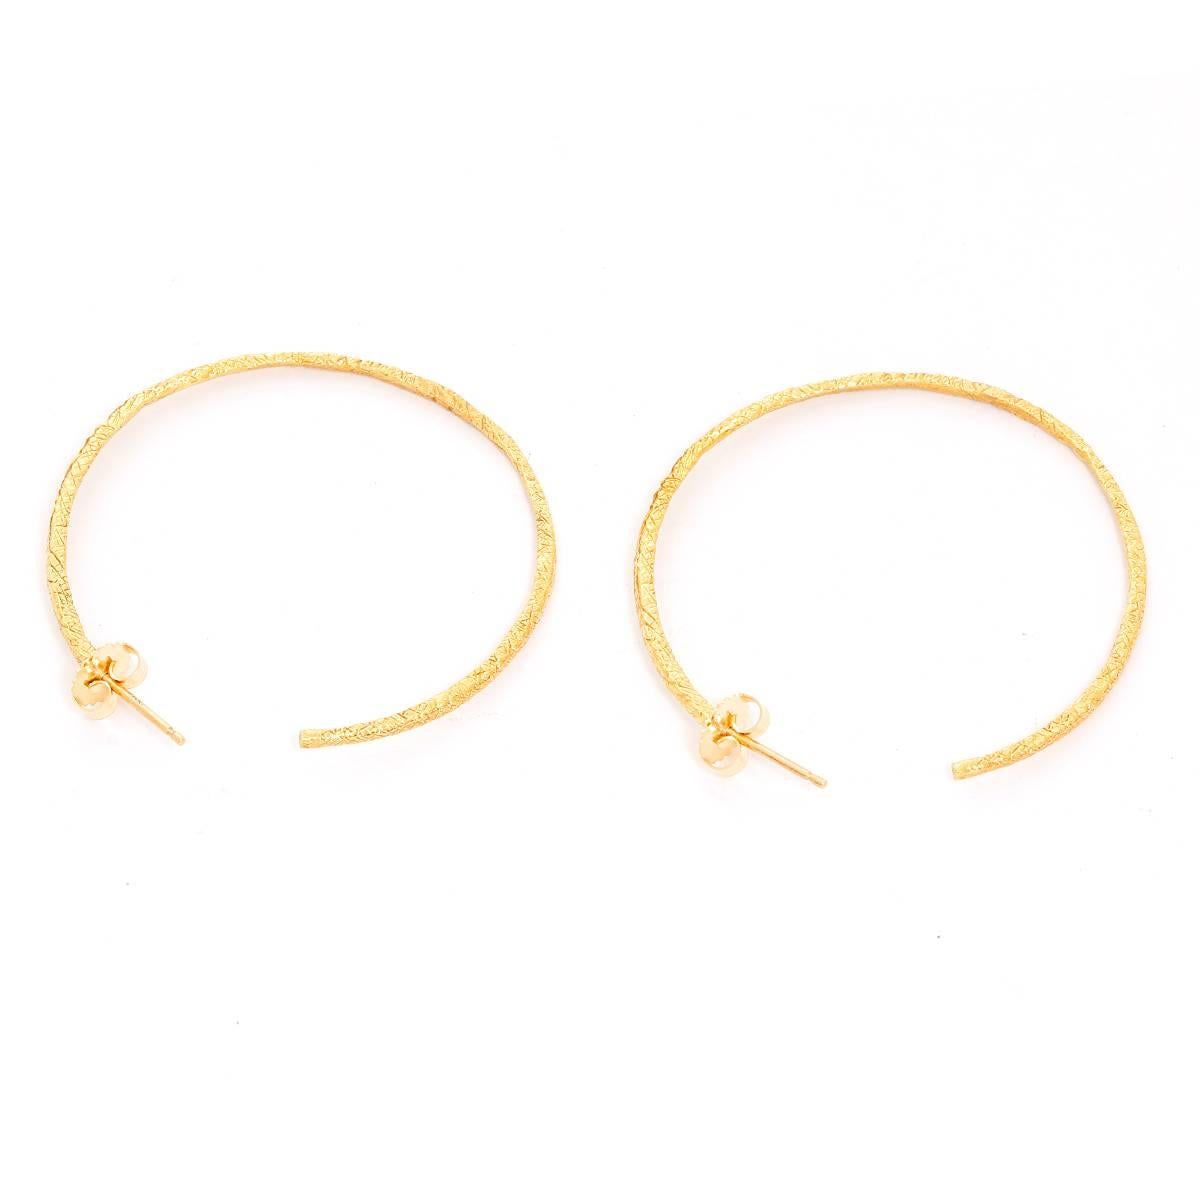 18K Yellow Gold Hammered Earring Hoops - . 2 in diameter. .2 mm in thickness. Total weight of 8.4 grams. Perfect for an every day look.